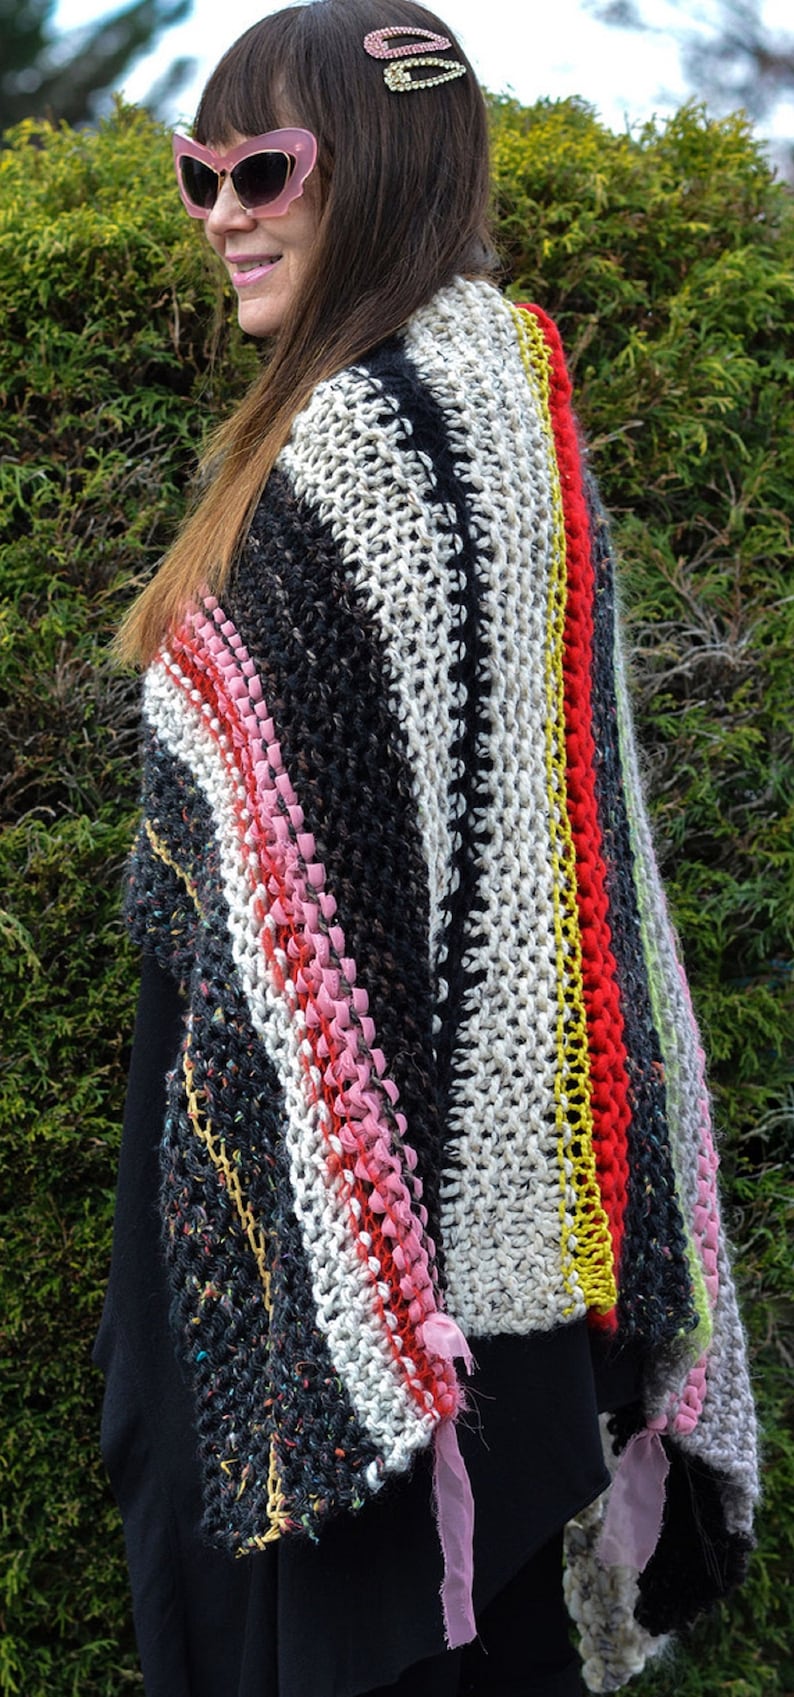 Craft Core Handknit Wrap with Big Button, Handknit Shawl Wrap, Multicolor Knit Wrap, Handknit Poncho Wrap, Gift for Mom Candy